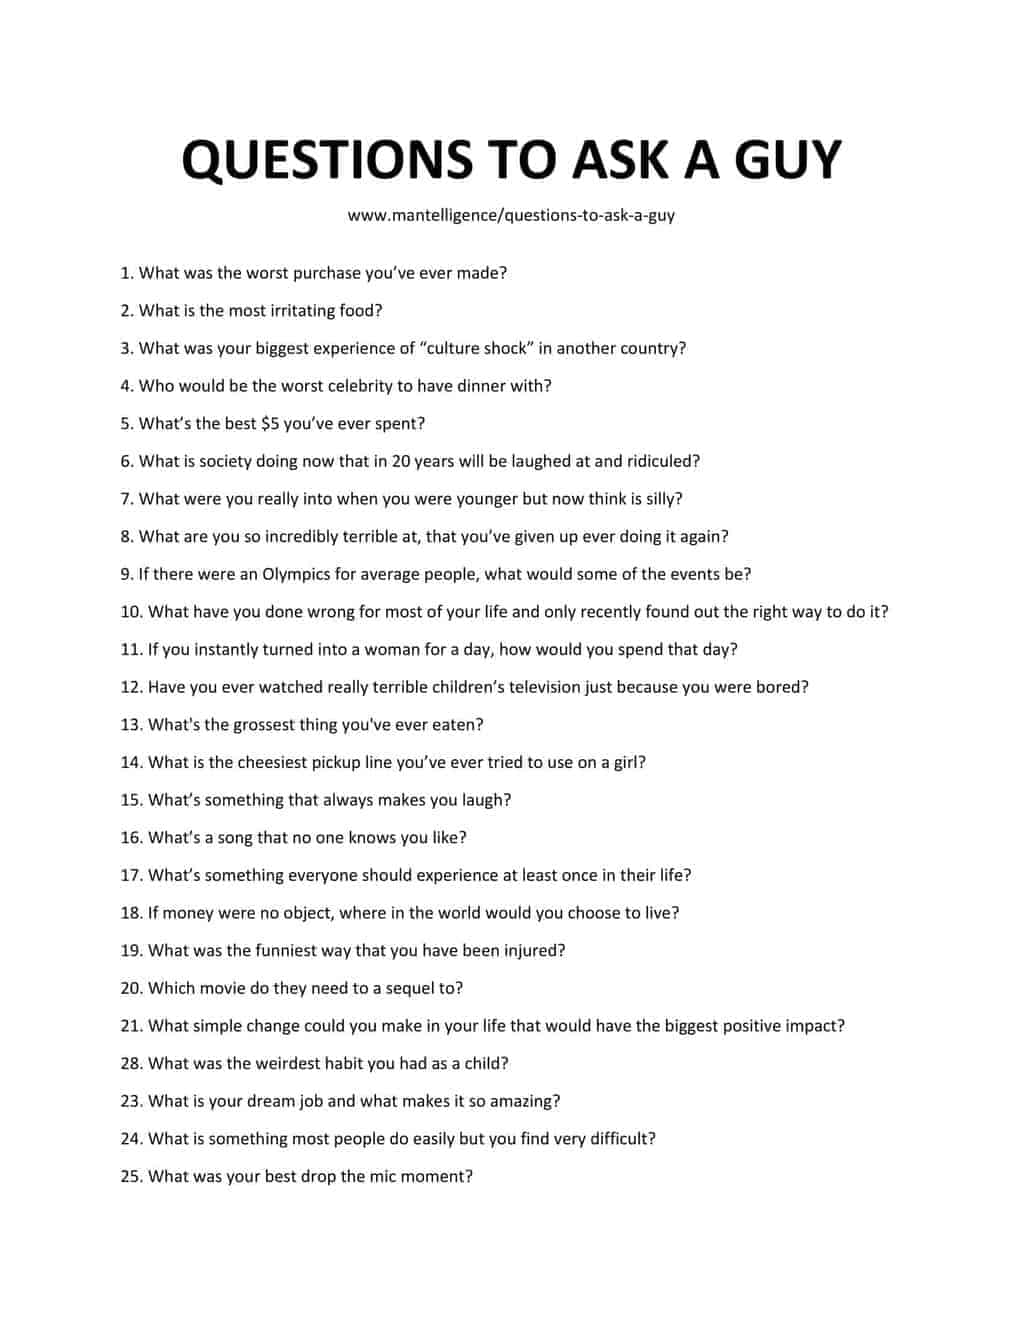 110 Good Questions to Ask a Guy - Start a conversation with your bros!